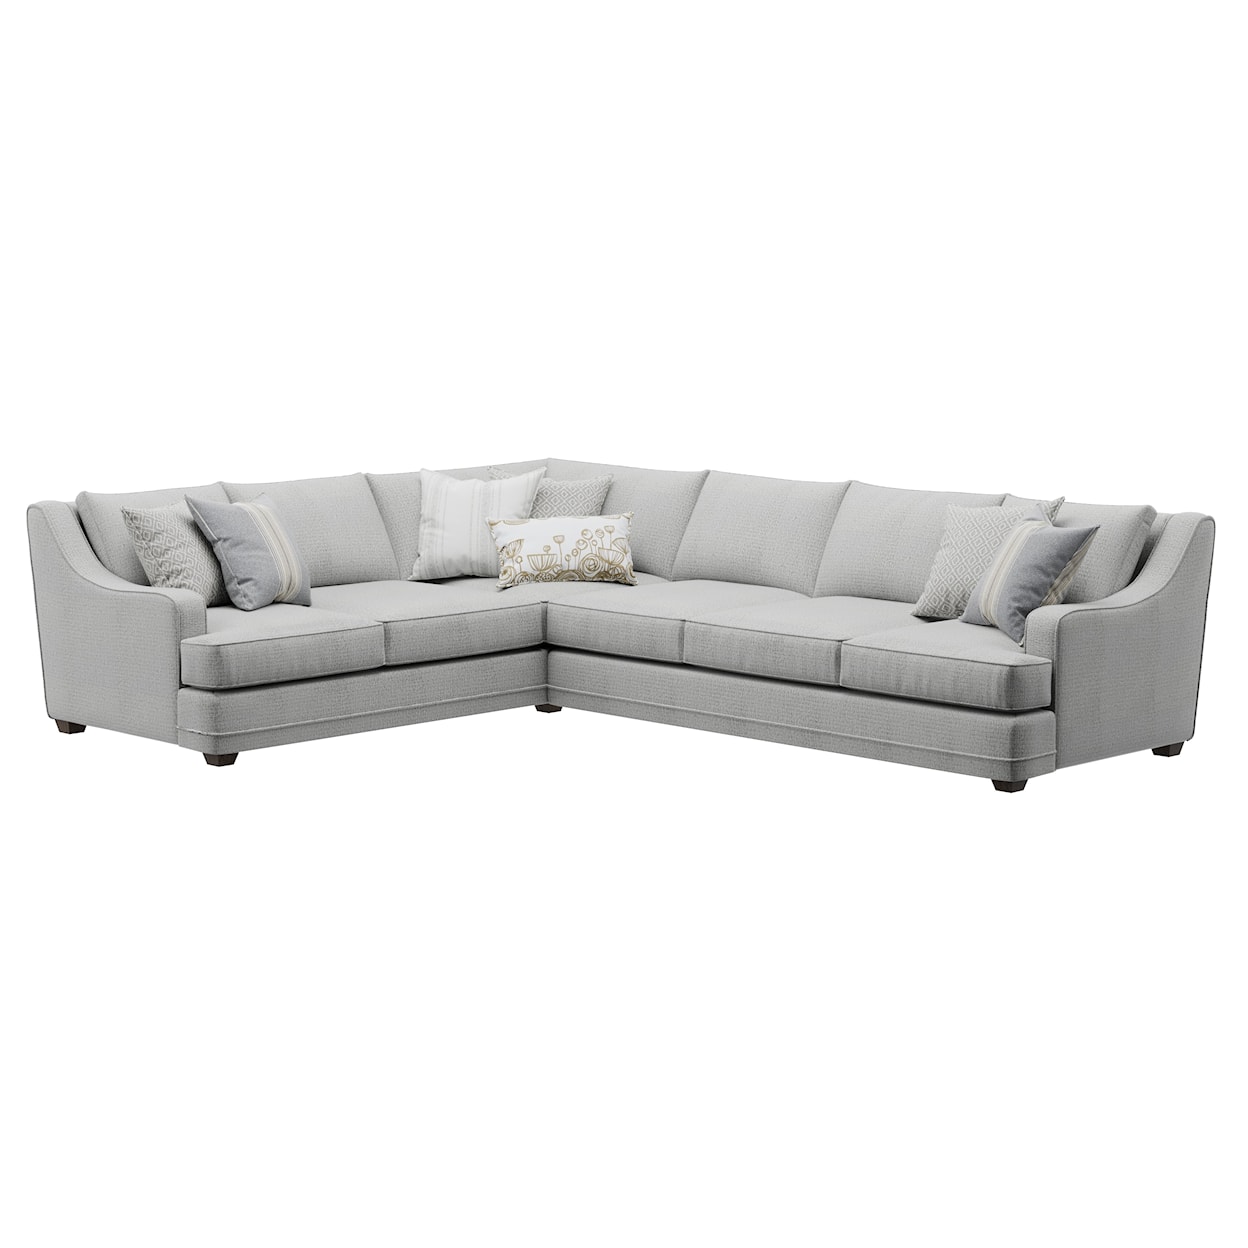 Fusion Furniture 7000 LIMELIGHT MINERAL 2-Piece Sectional